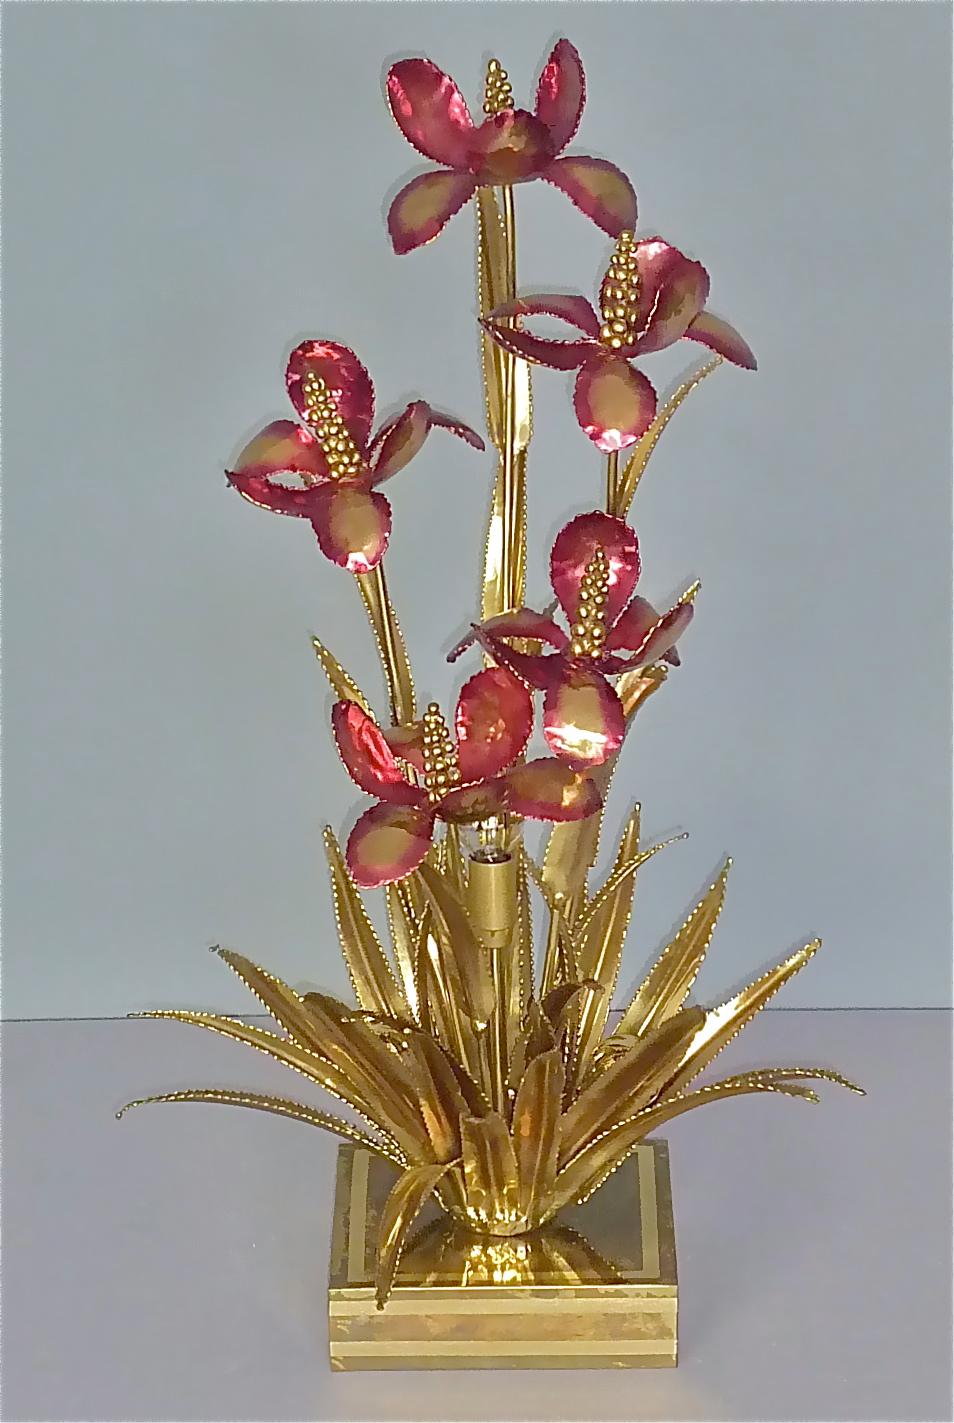 Rare and extraordinary French sculptural Maison Jansen flower table or floor lamp, Paris France, circa 1970s. The three light beauty which is 74 cm / 29.13 inches tall, 42 cm / 16.54 inches wide and 32 cm / 12.60 inches deep, is made of partly gilt